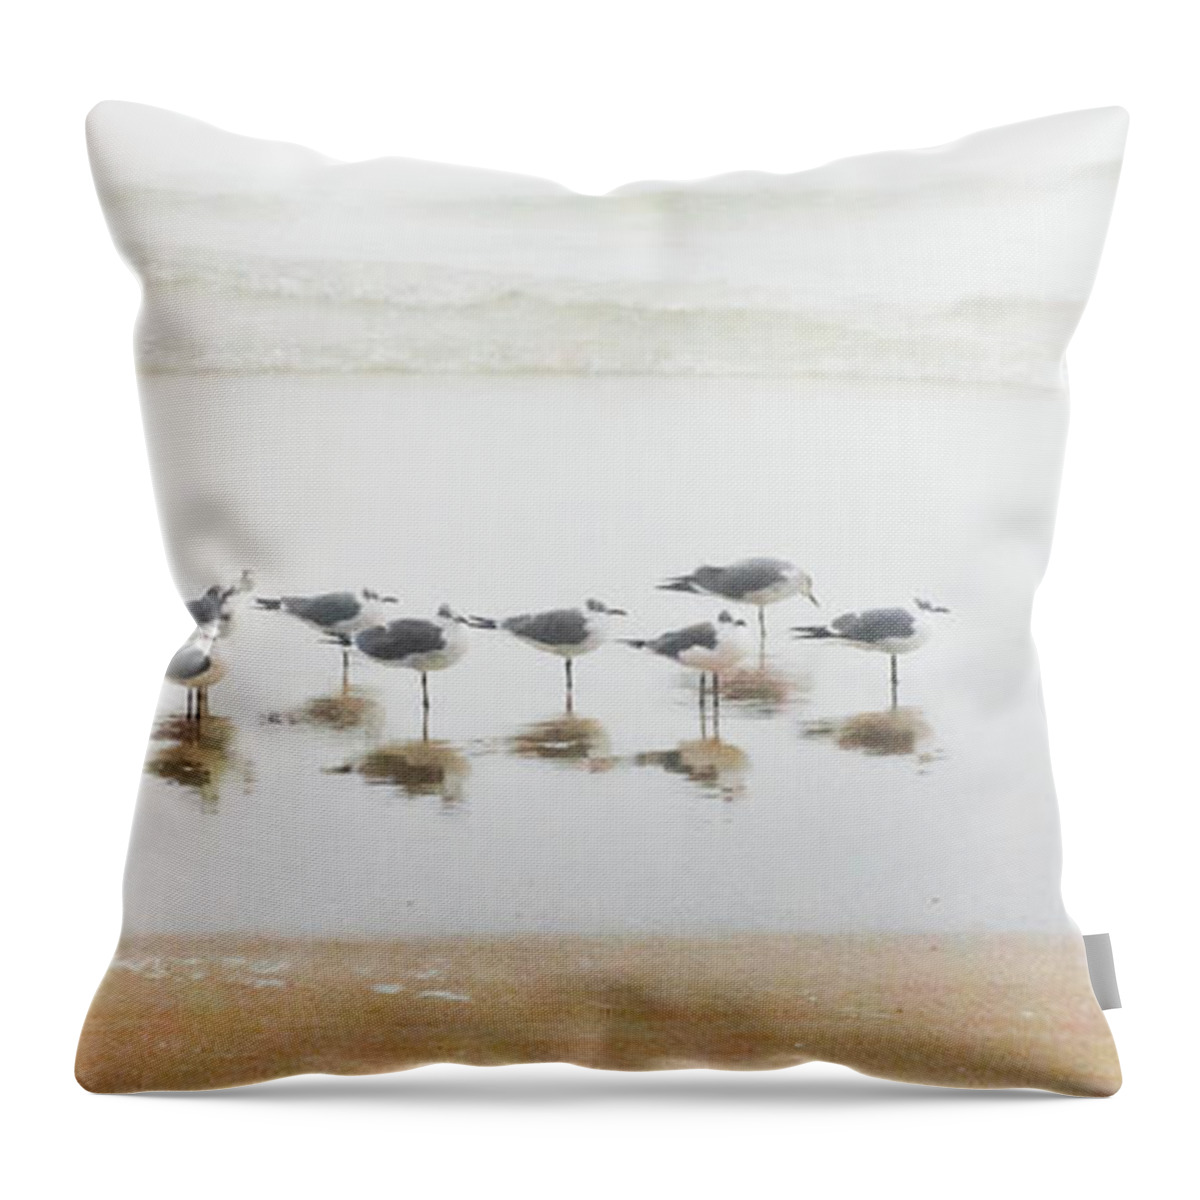 Birds Throw Pillow featuring the photograph Grounded By Fog by Christopher Holmes